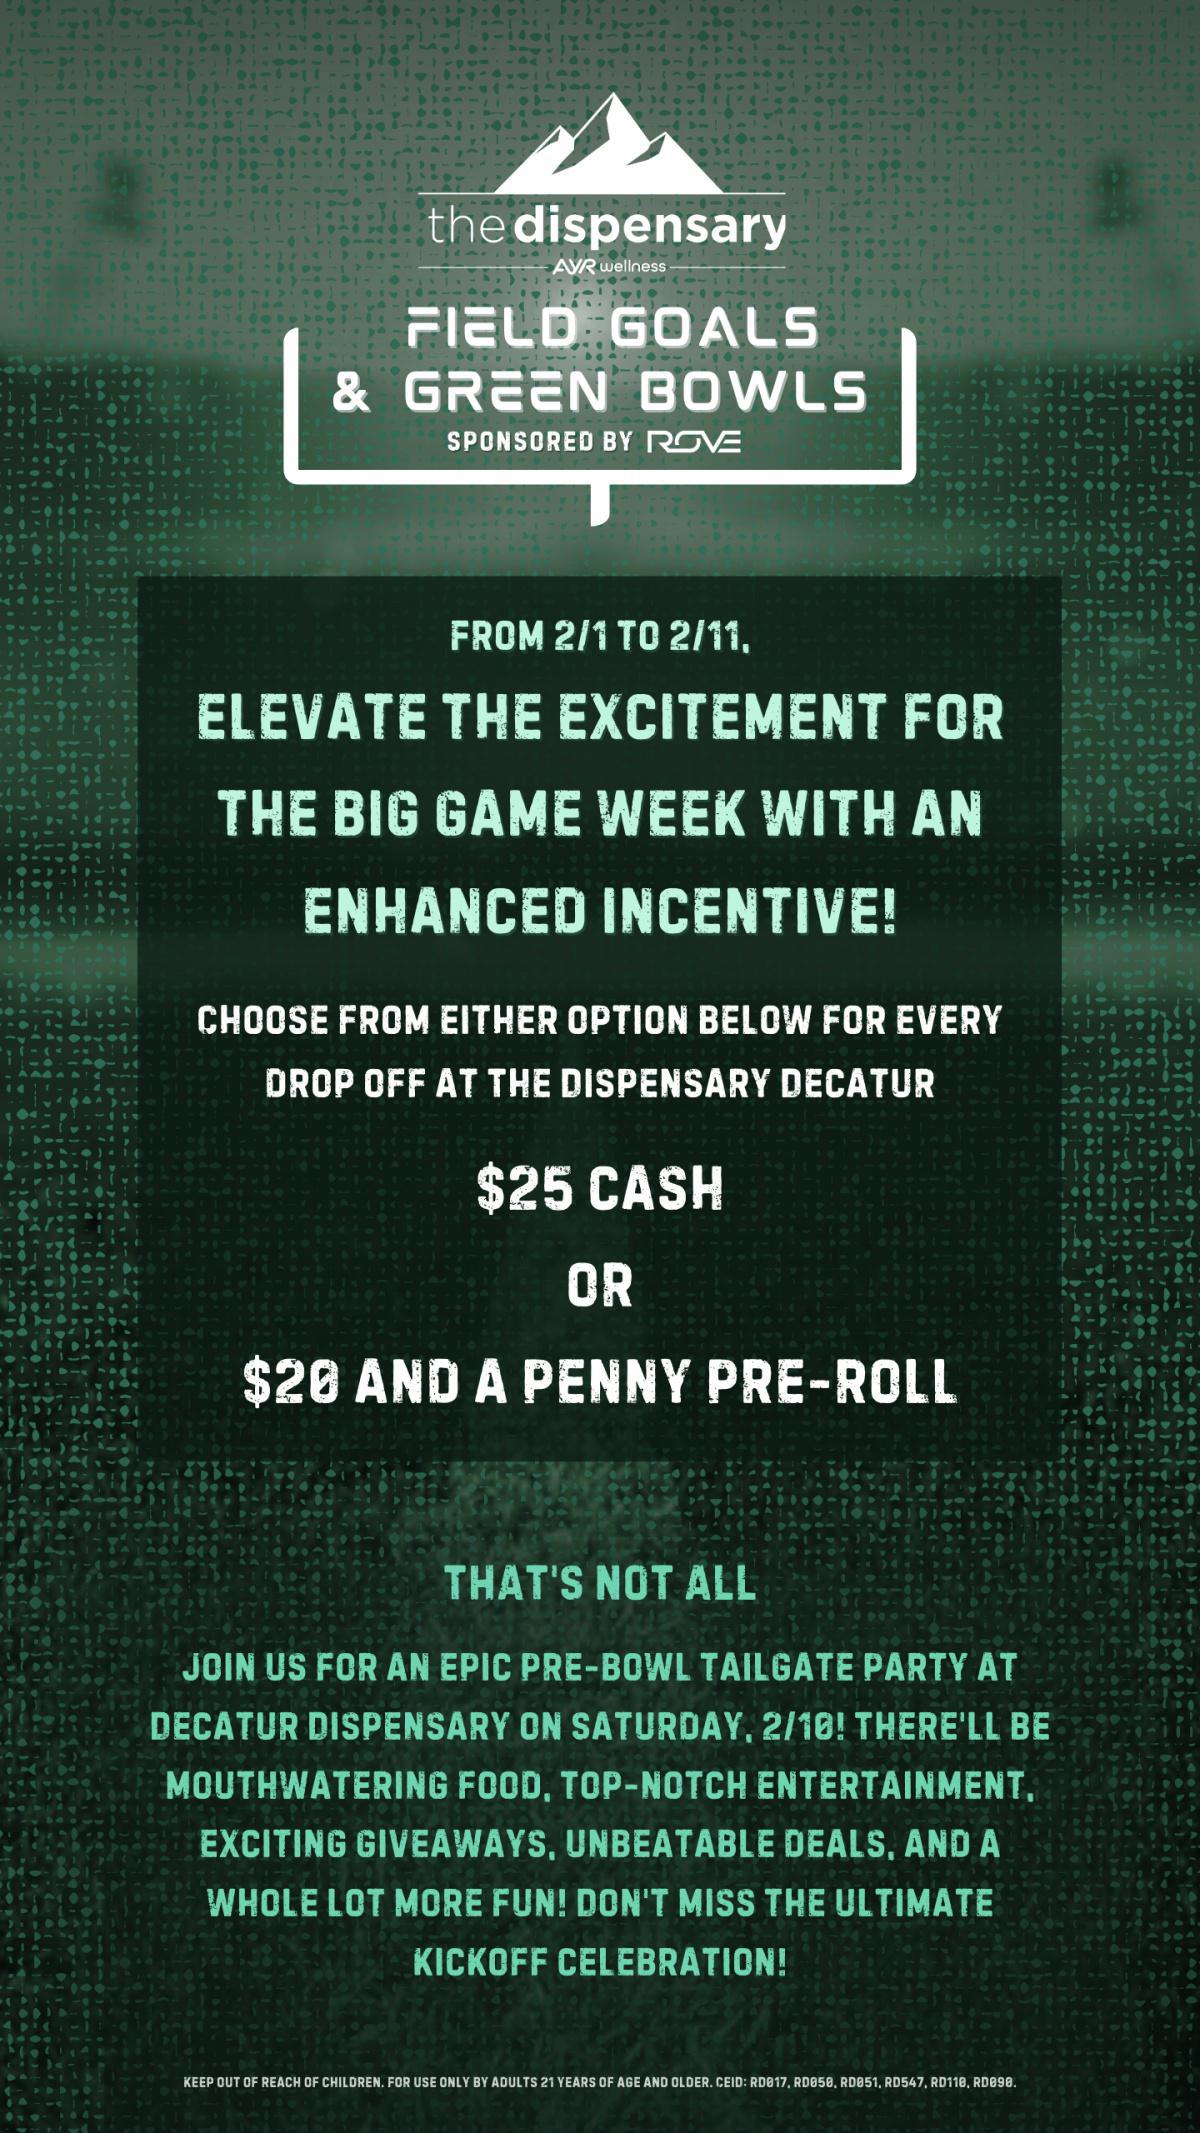 Golden Touchdown Rewards! Earn $25 per drop at The Dispensary Decatur & snag a penny pre-roll. Every drop off is a win-win in our game.